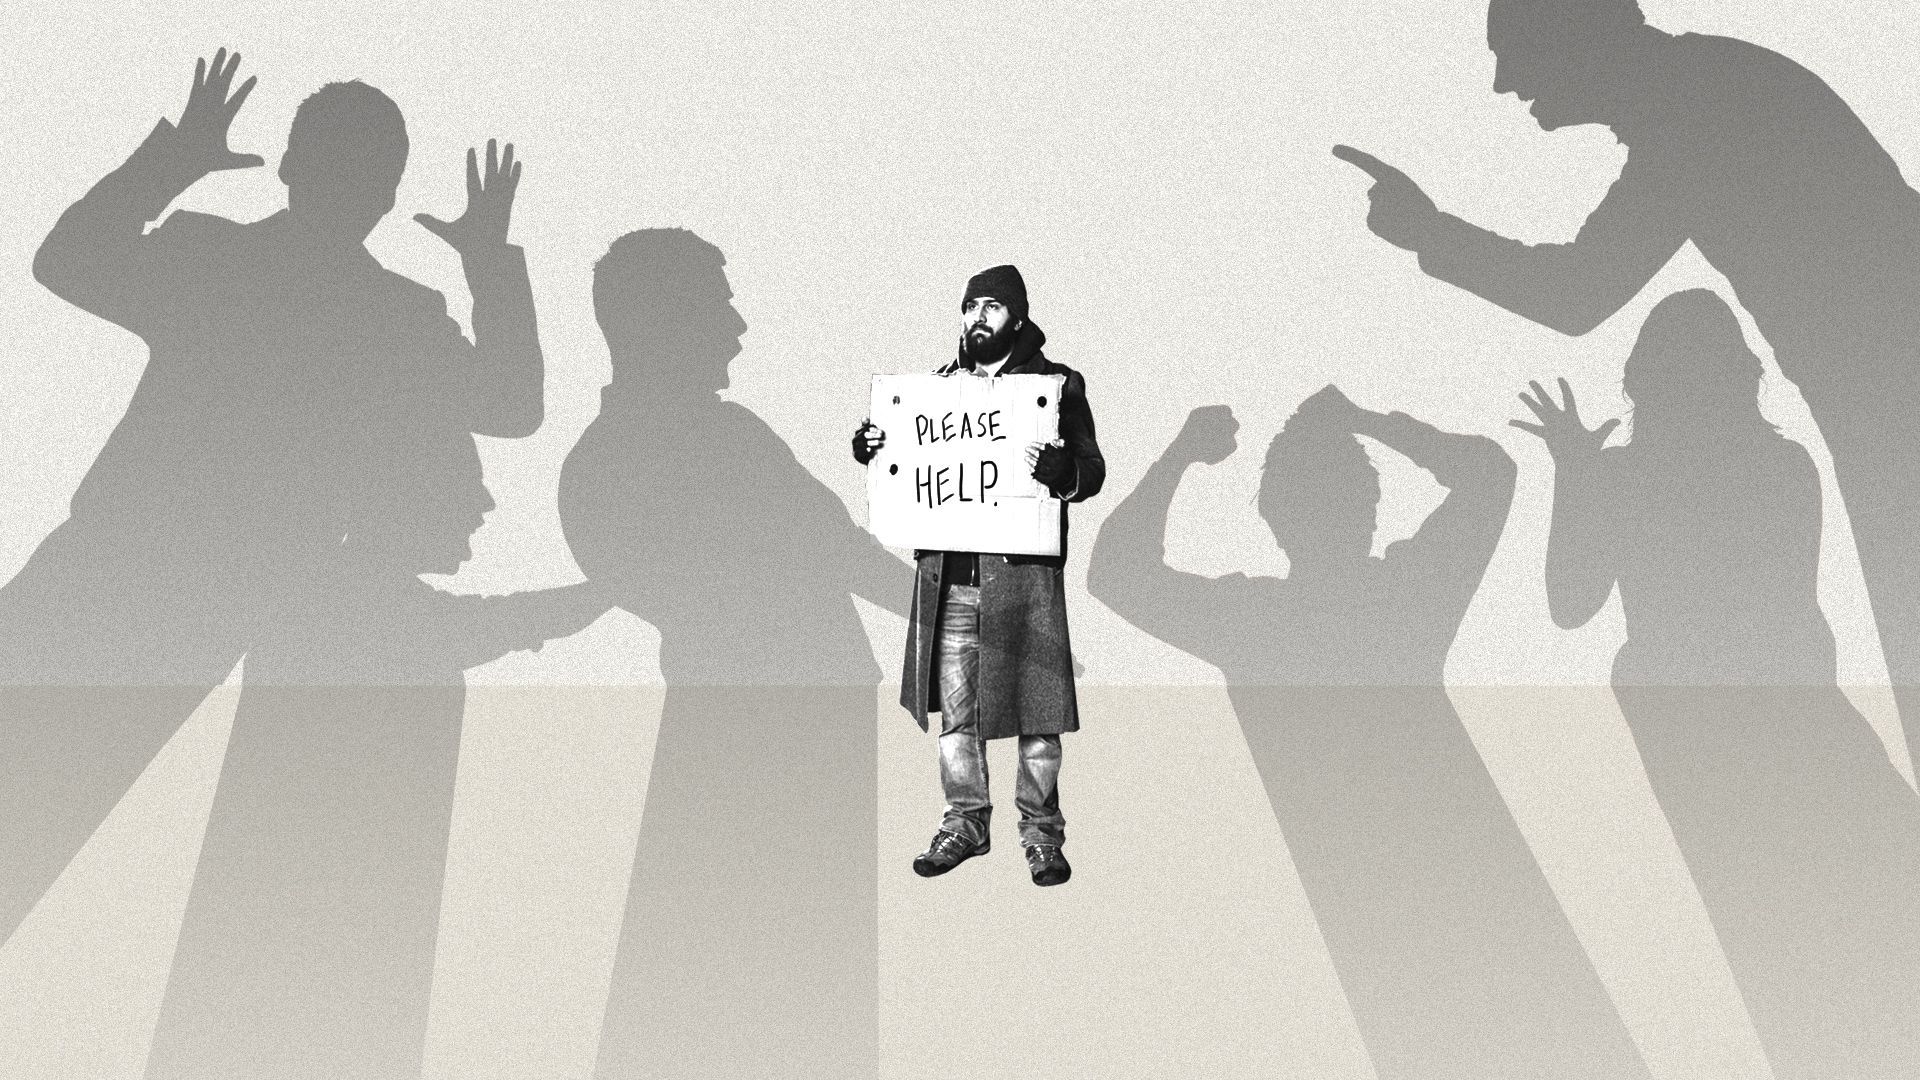 An illustration of shadows pointing fingers and struggling to deal with a homeless person